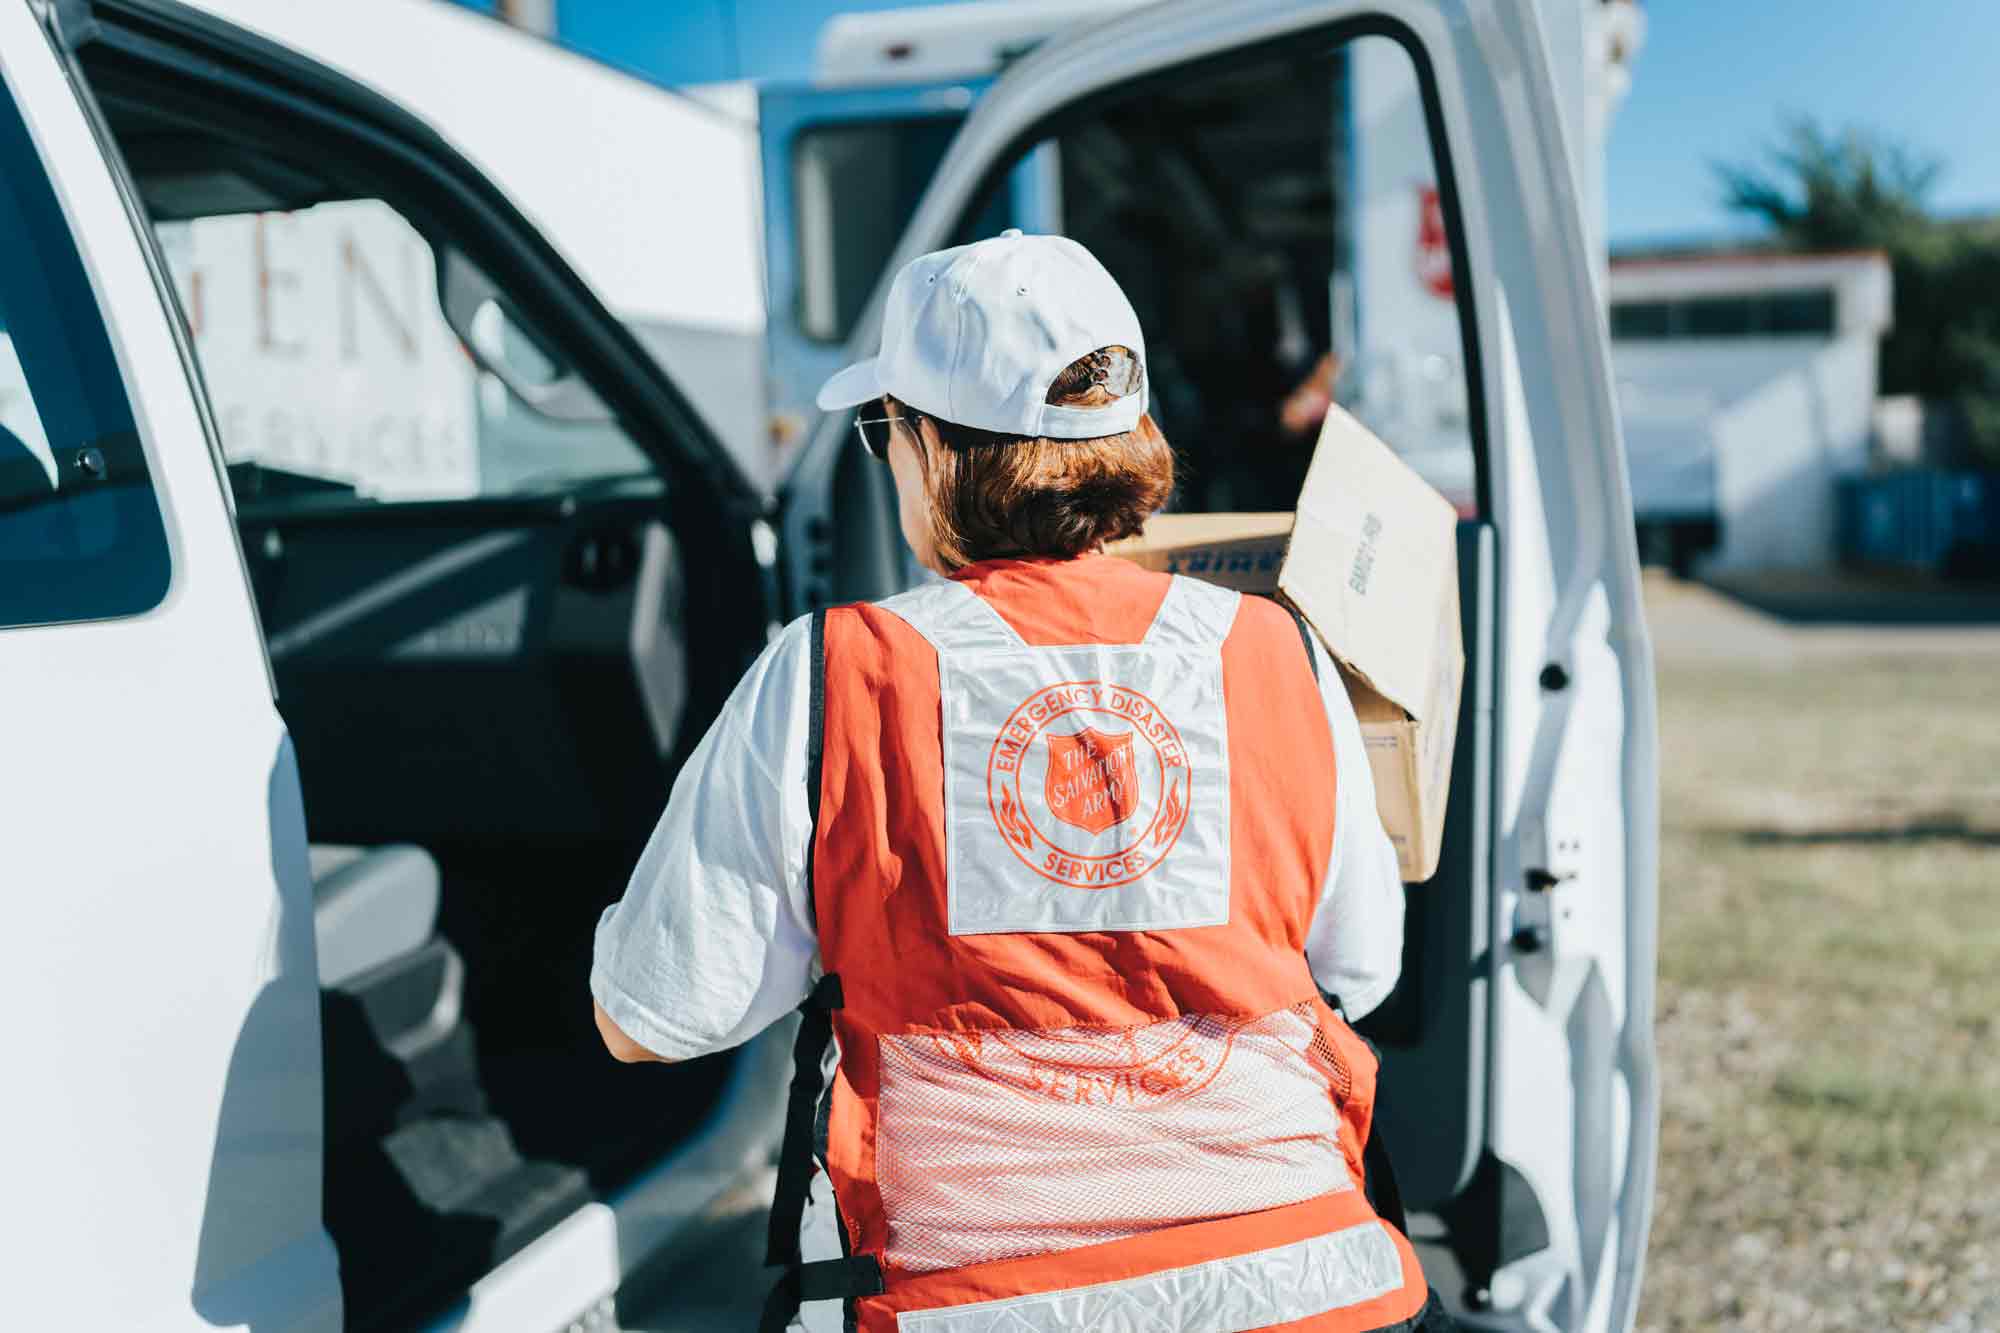 Remembering the hope from The Salvation Army's response to Hurricane Iniki's destruction